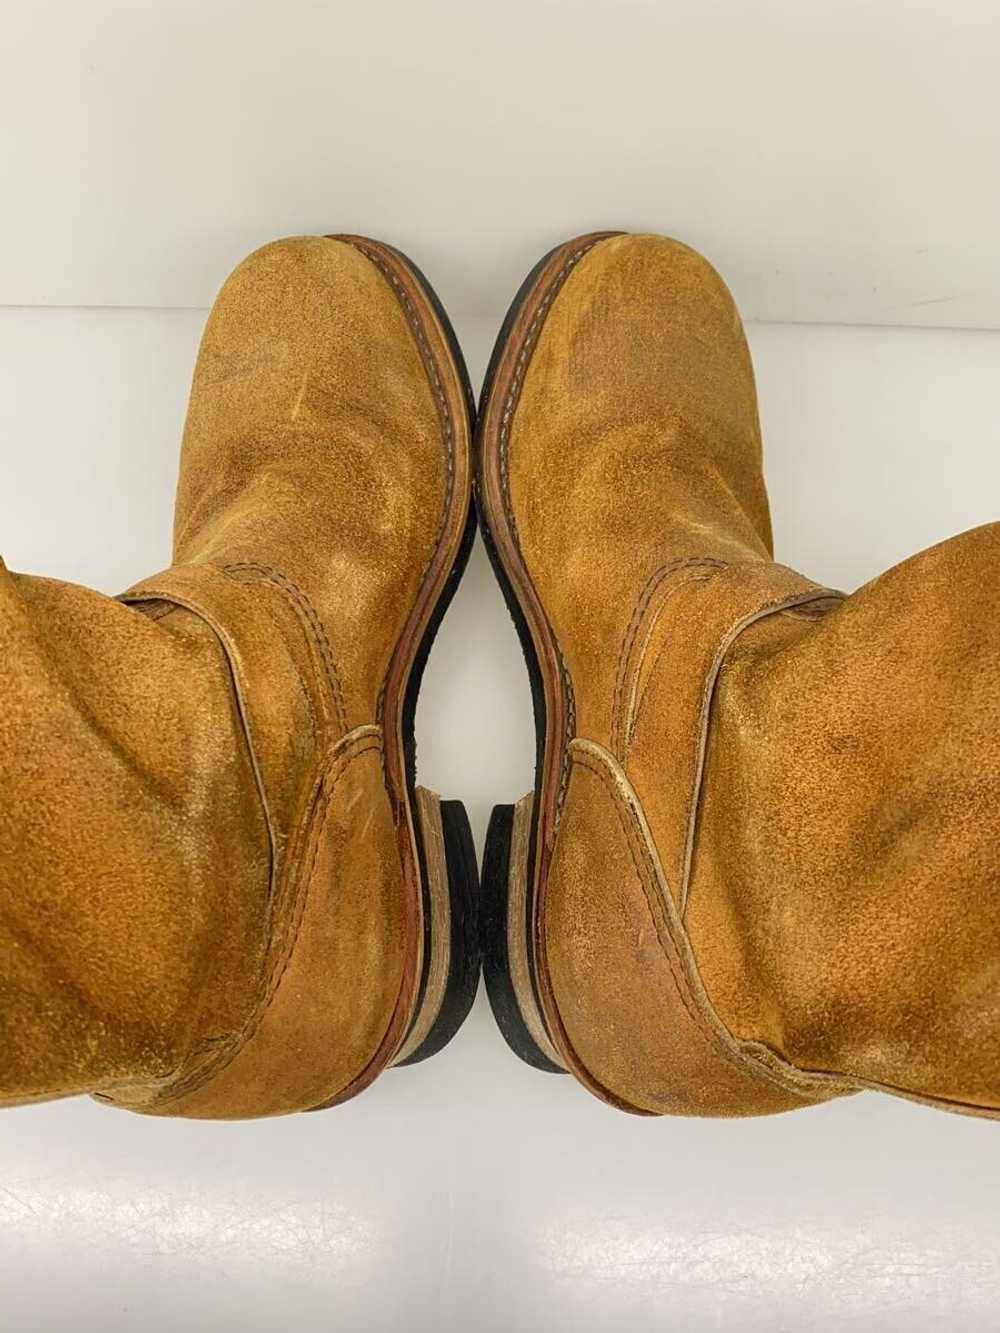 Red Wing Engineer Boots Us9 Cml Suede 8178 Shoes - image 6